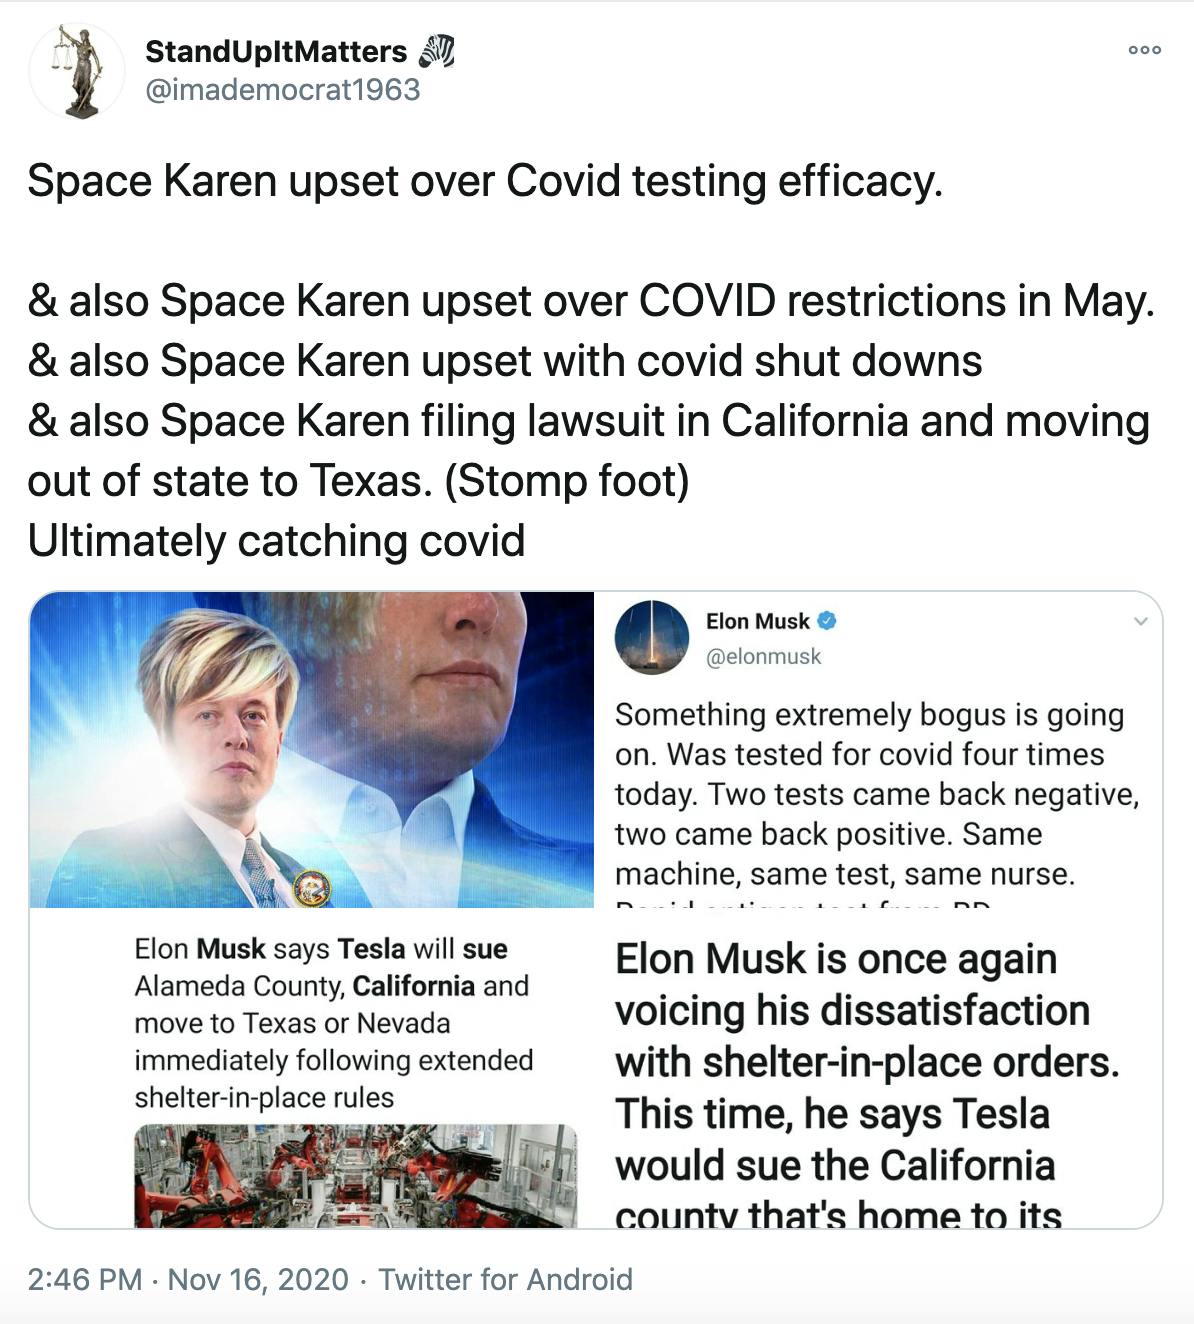 'Space Karen upset over Covid testing efficacy. & also Space Karen upset over COVID restrictions in May. & also Space Karen upset with covid shut downs & also Space Karen filing lawsuit in California and moving out of state to Texas. (Stomp foot) Ultimately catching covid' screenshots of the tweets referenced